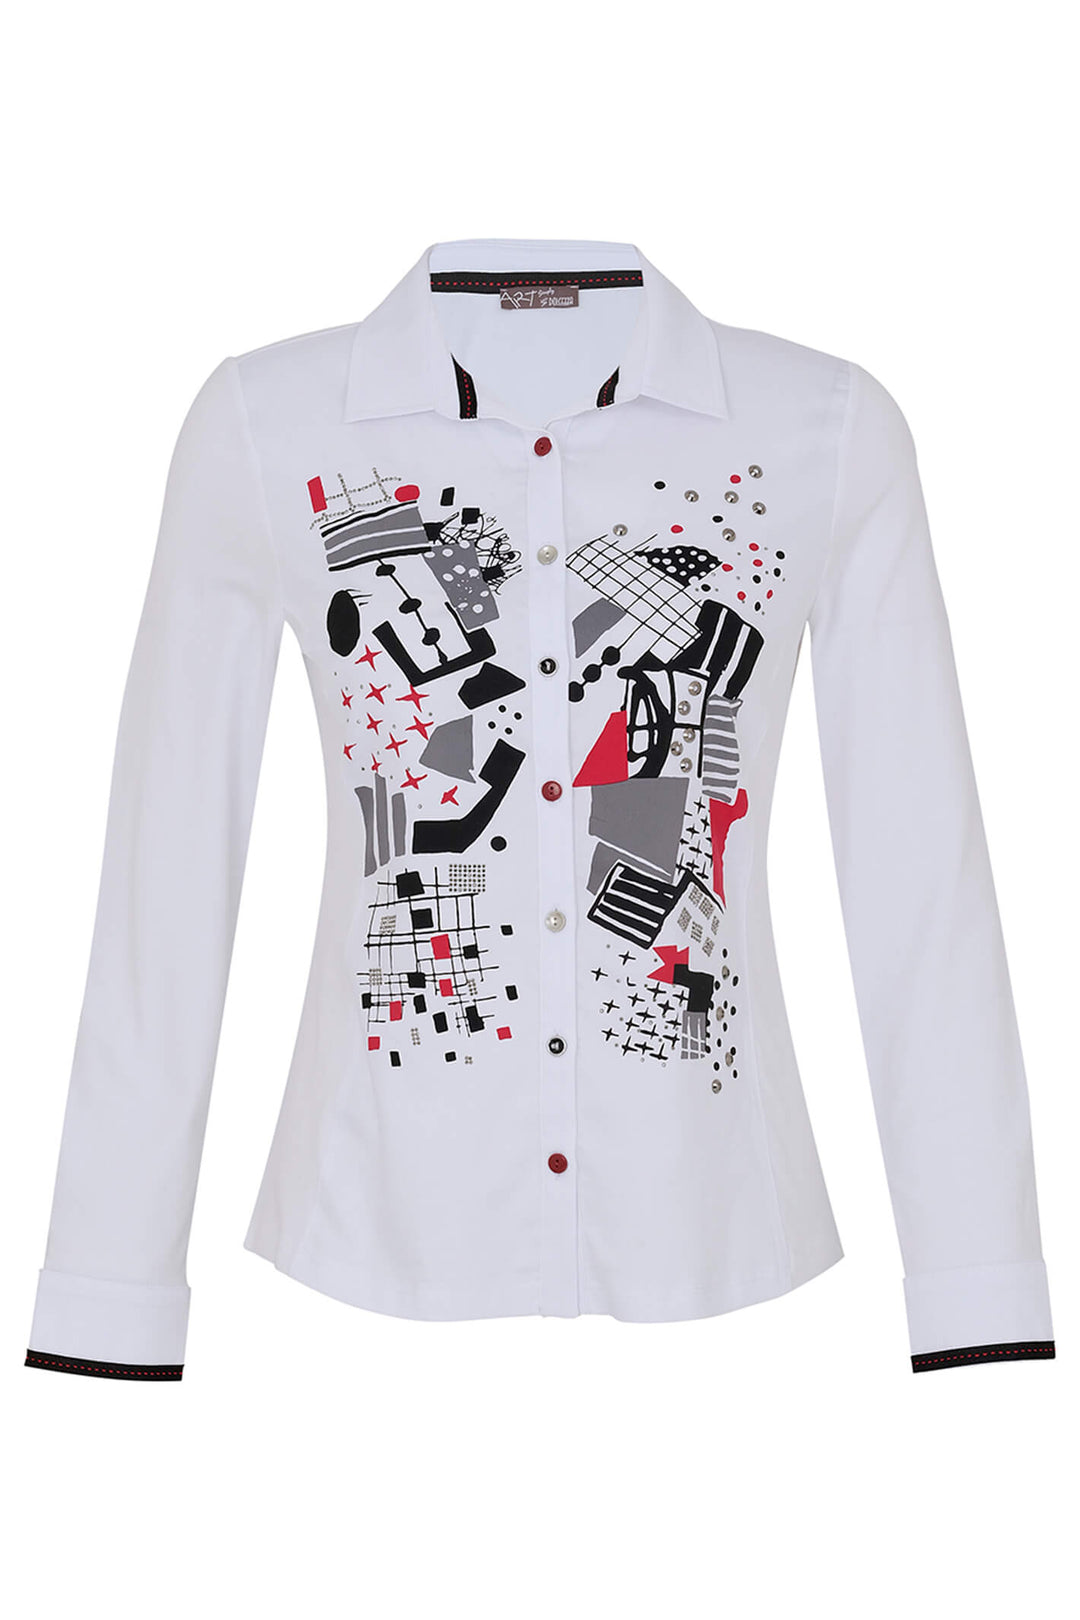 Dolcezza 73605 White Natalie Green Print Shirt - Experience Boutique